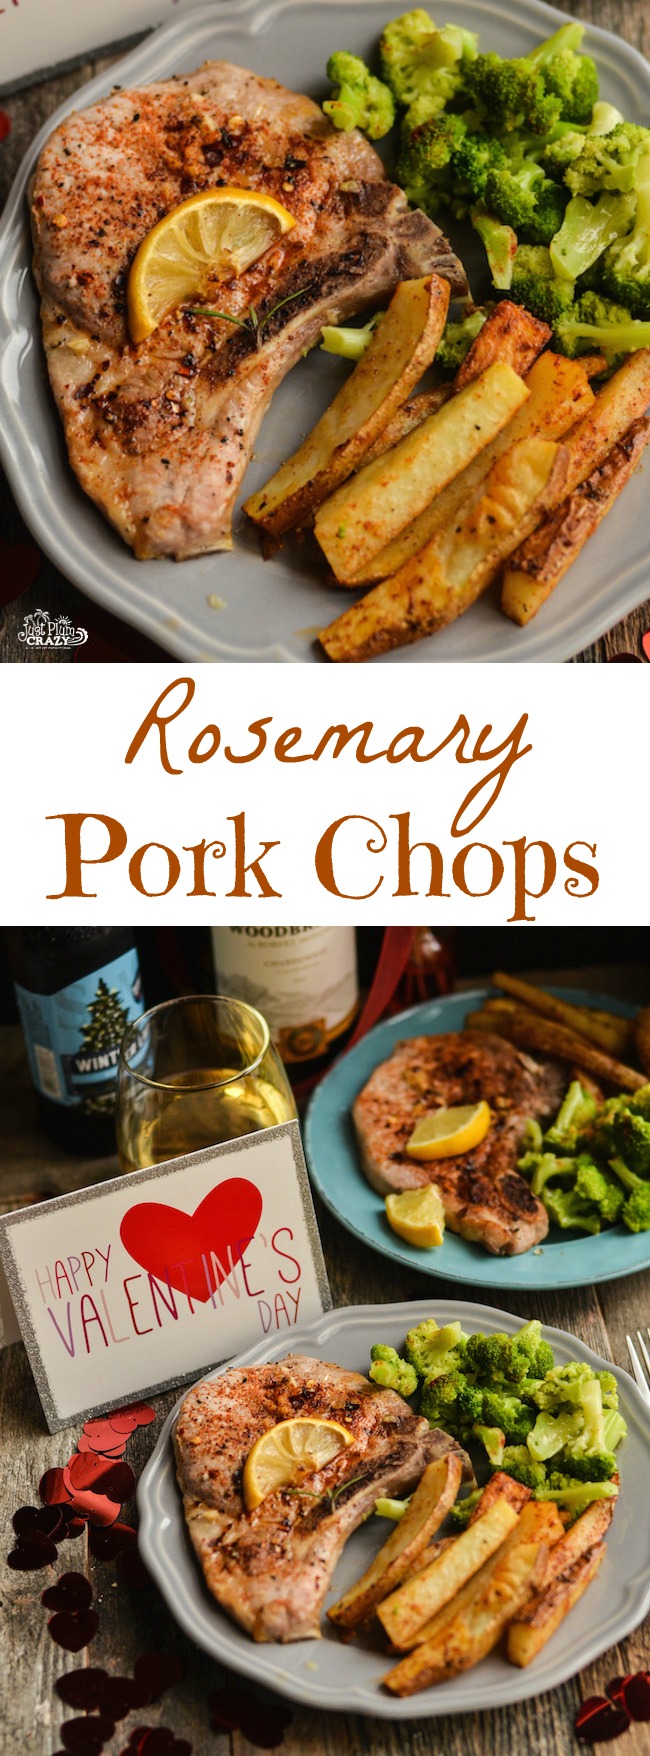 Rosemary Pork Chops recipe is the perfect Valentine's Day meal for you & yours with baked potato wedges & steamed broccoli ending with Raspberry Galette.